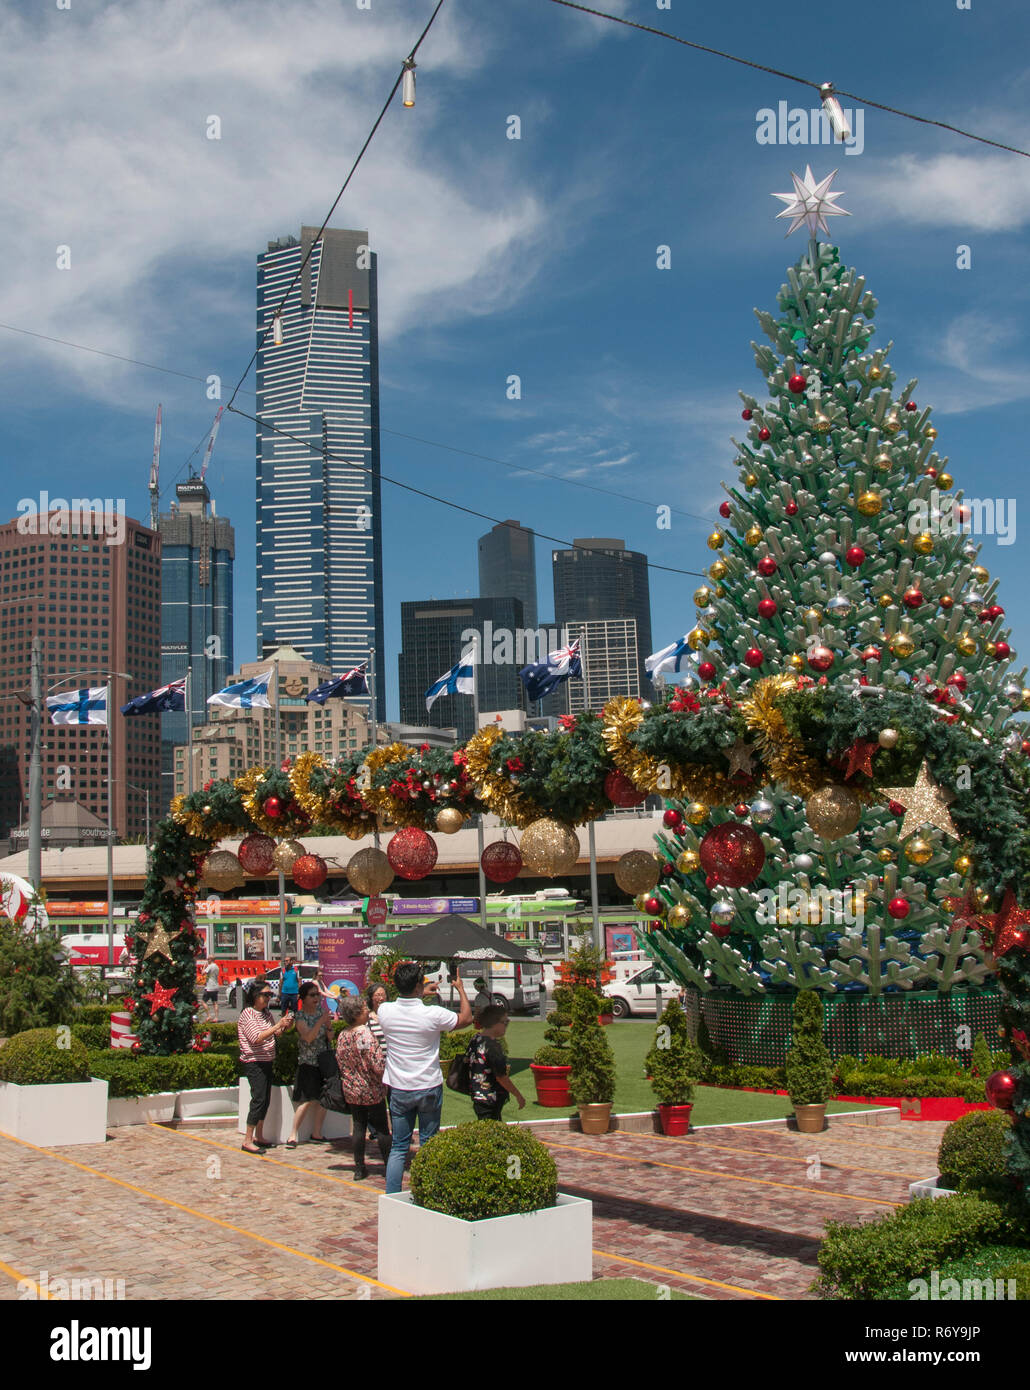 Christmas festivities at Federation Square, with Eureka Tower dominating the Southgate skyline beyond. Melbourne, Australia, December 2018 Stock Photo